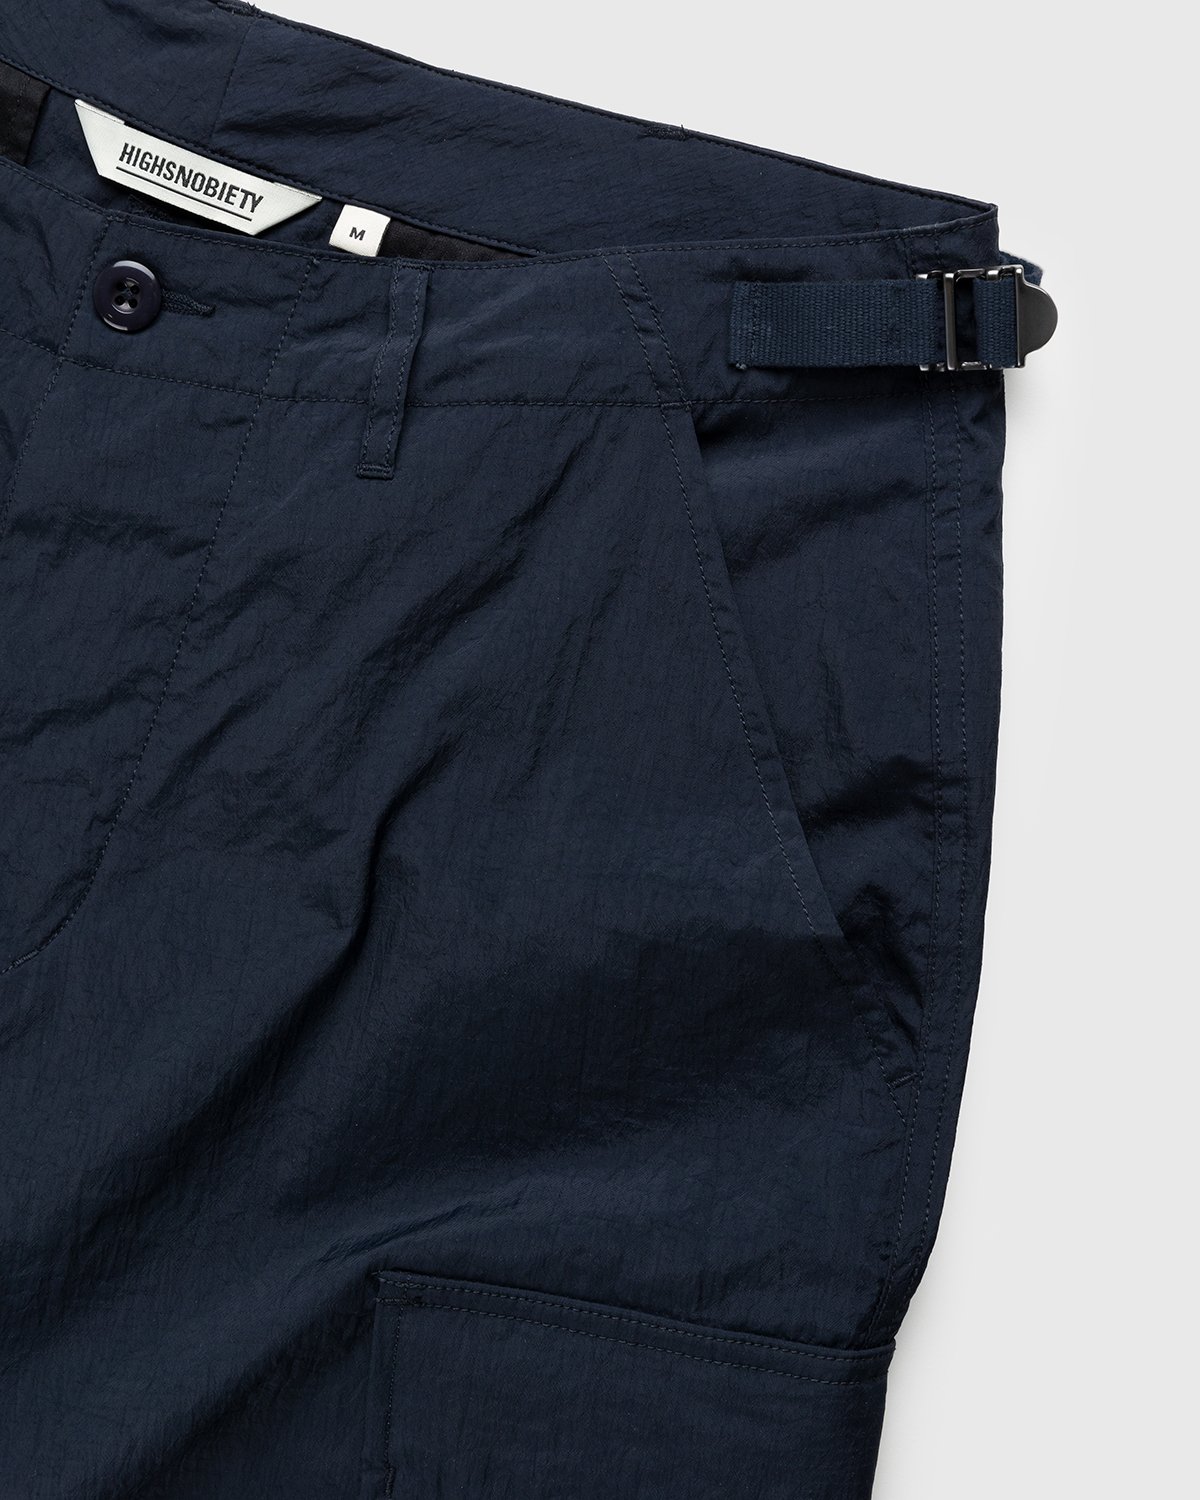 Highsnobiety - Water-Resistant Ripstop Cargo Pants Blue - Clothing - Blue - Image 4